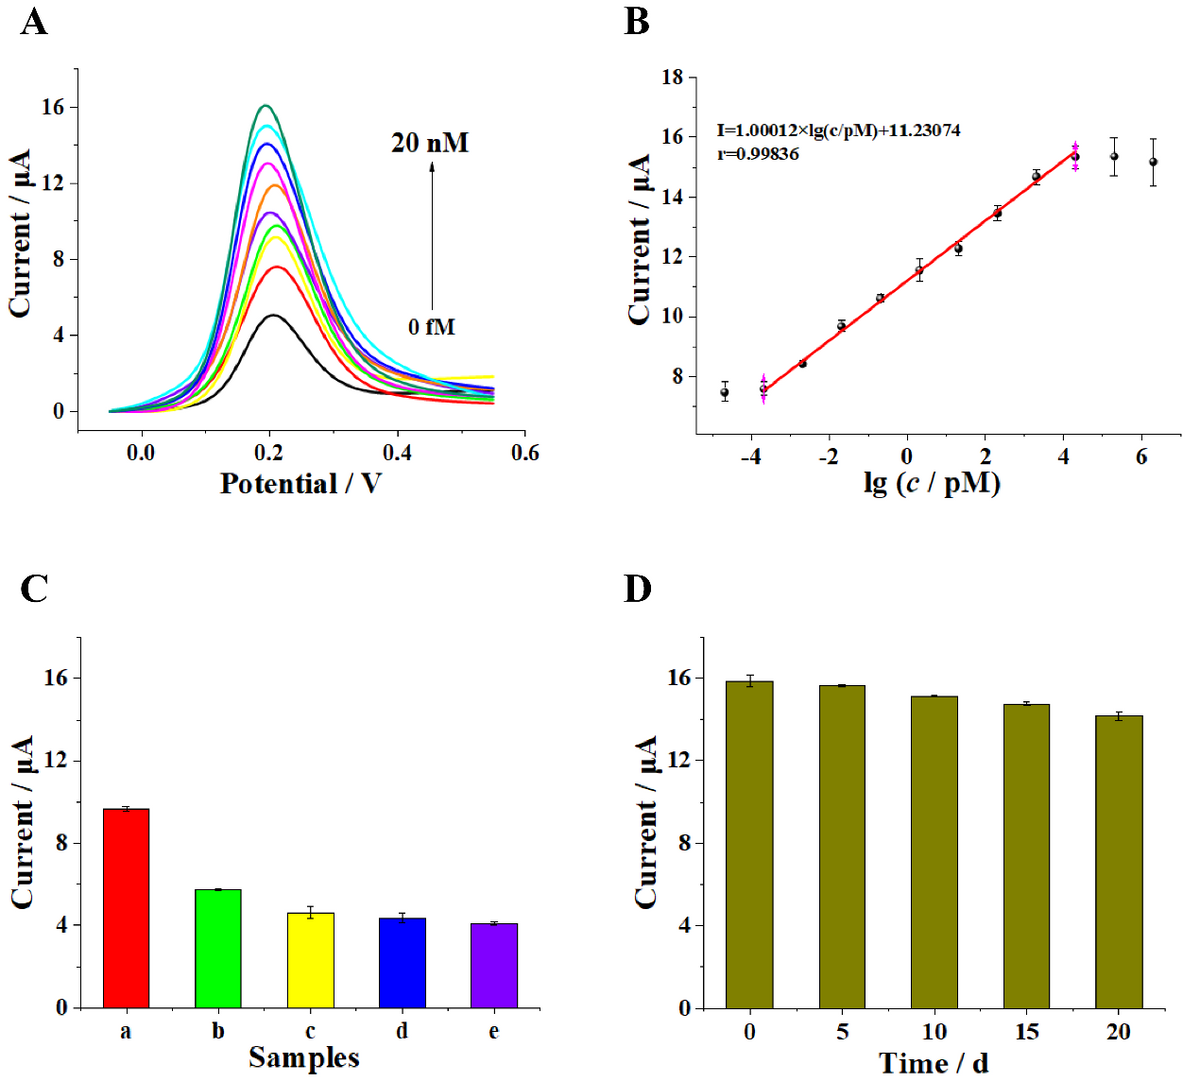 Evaluation of the sensitivity and specificity of the biosensor: (A) DPV curves response of the electrochemical biosensor upon the increase in target BCR/ABL fusion gene concentration (from bottom to top: 0 fM, 0.2 fM, 2 fM, 20 fM, 200 fM, 2 pM, 20 pM, 200 pM, and 2 nM, 20 nM, separately) and (B) the corresponding linear relationship between DPV signal and logarithmic value of target BCR/ABL fusion gene concentrations (range of concentration: 20 aM, 0.2 fM, 2 fM, 20 fM, 200 fM, 2 pM, 20 pM, 200 pM, and 2 nM, 20 nM, 200 nM, 2 uM separately). (C) DPV responses of the electrochemical biosensor to different oligonucleotides (20 fM): (a) BCR/ABL fusion gene (target), (b) single-base-mismatched strand (B1), (c) two-base-mismatched strand (B2), (d) noncomplementary strand (B3), and (e) blank. (D) Stability of the proposed biosensor. The error bars represent the standard deviation of three parallel measurements.